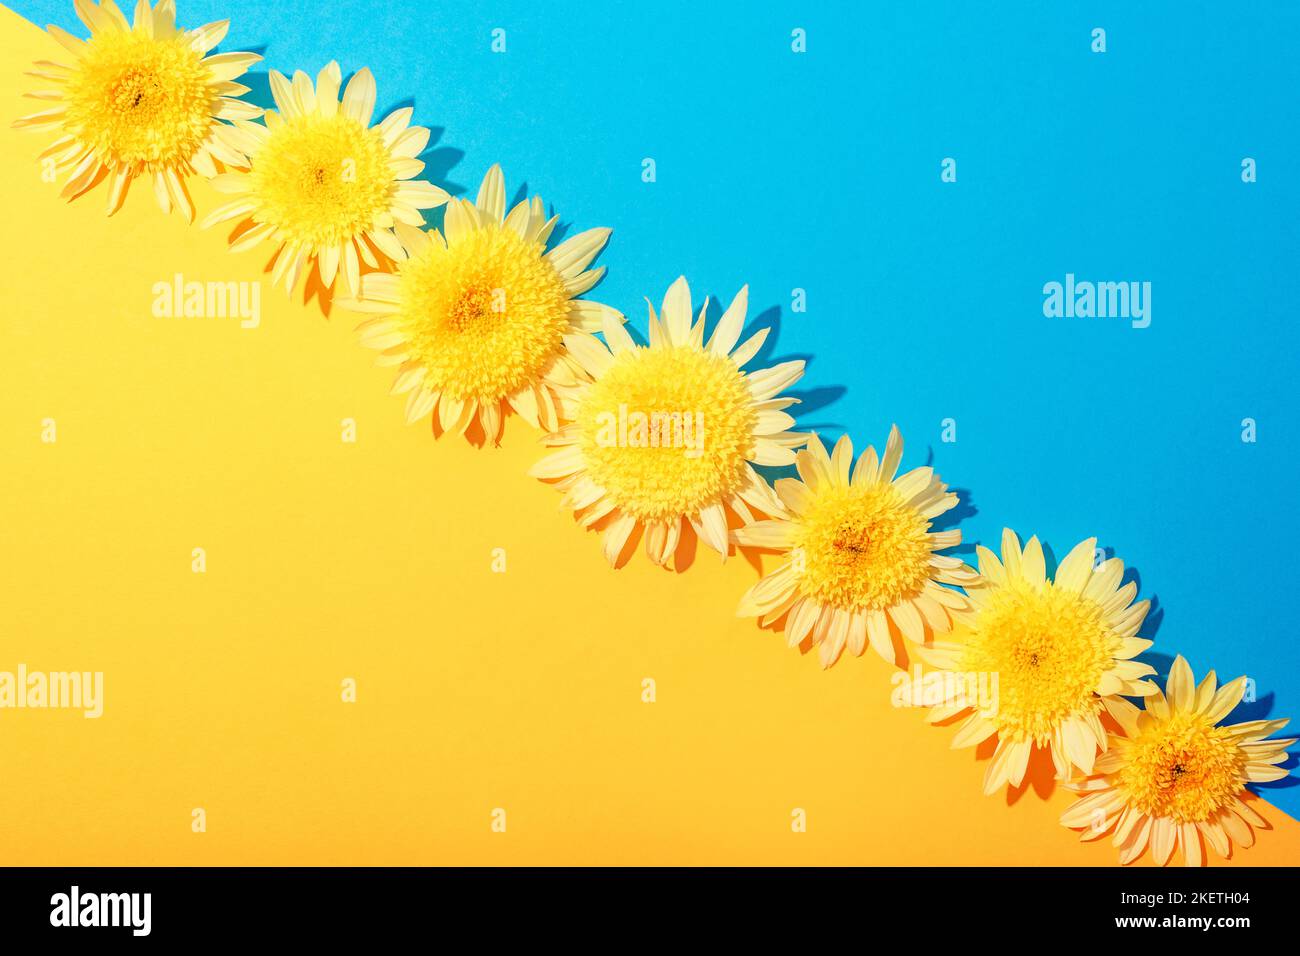 Blue and yellow background with chrysanthemum flowers. Top view, flat lay, copy space. Stock Photo